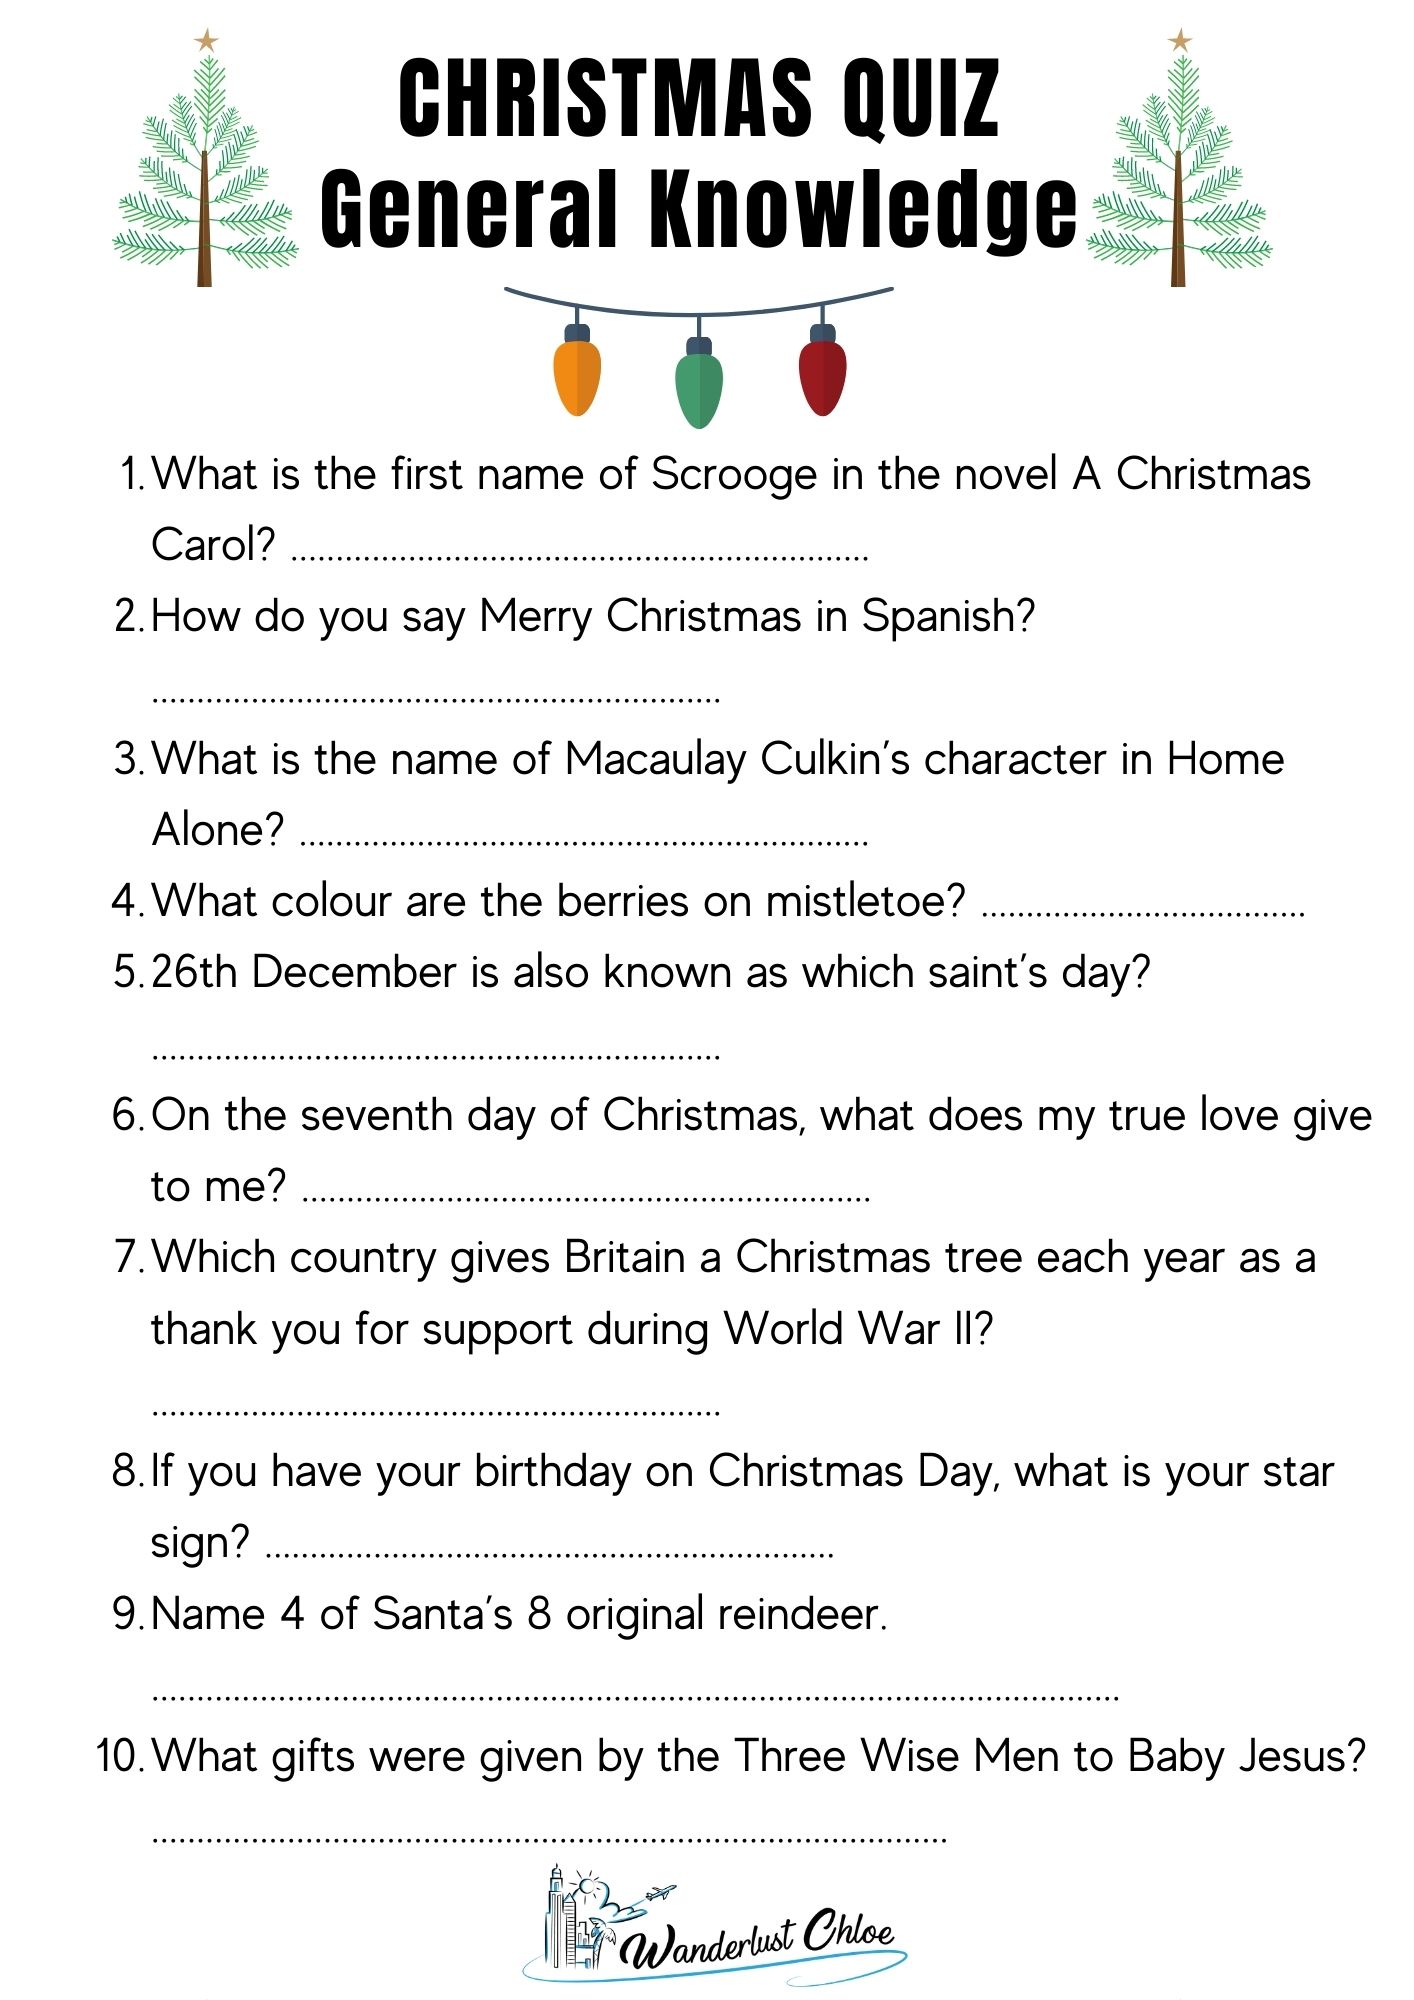 Printable Christmas Quiz Questions - General Knowledge